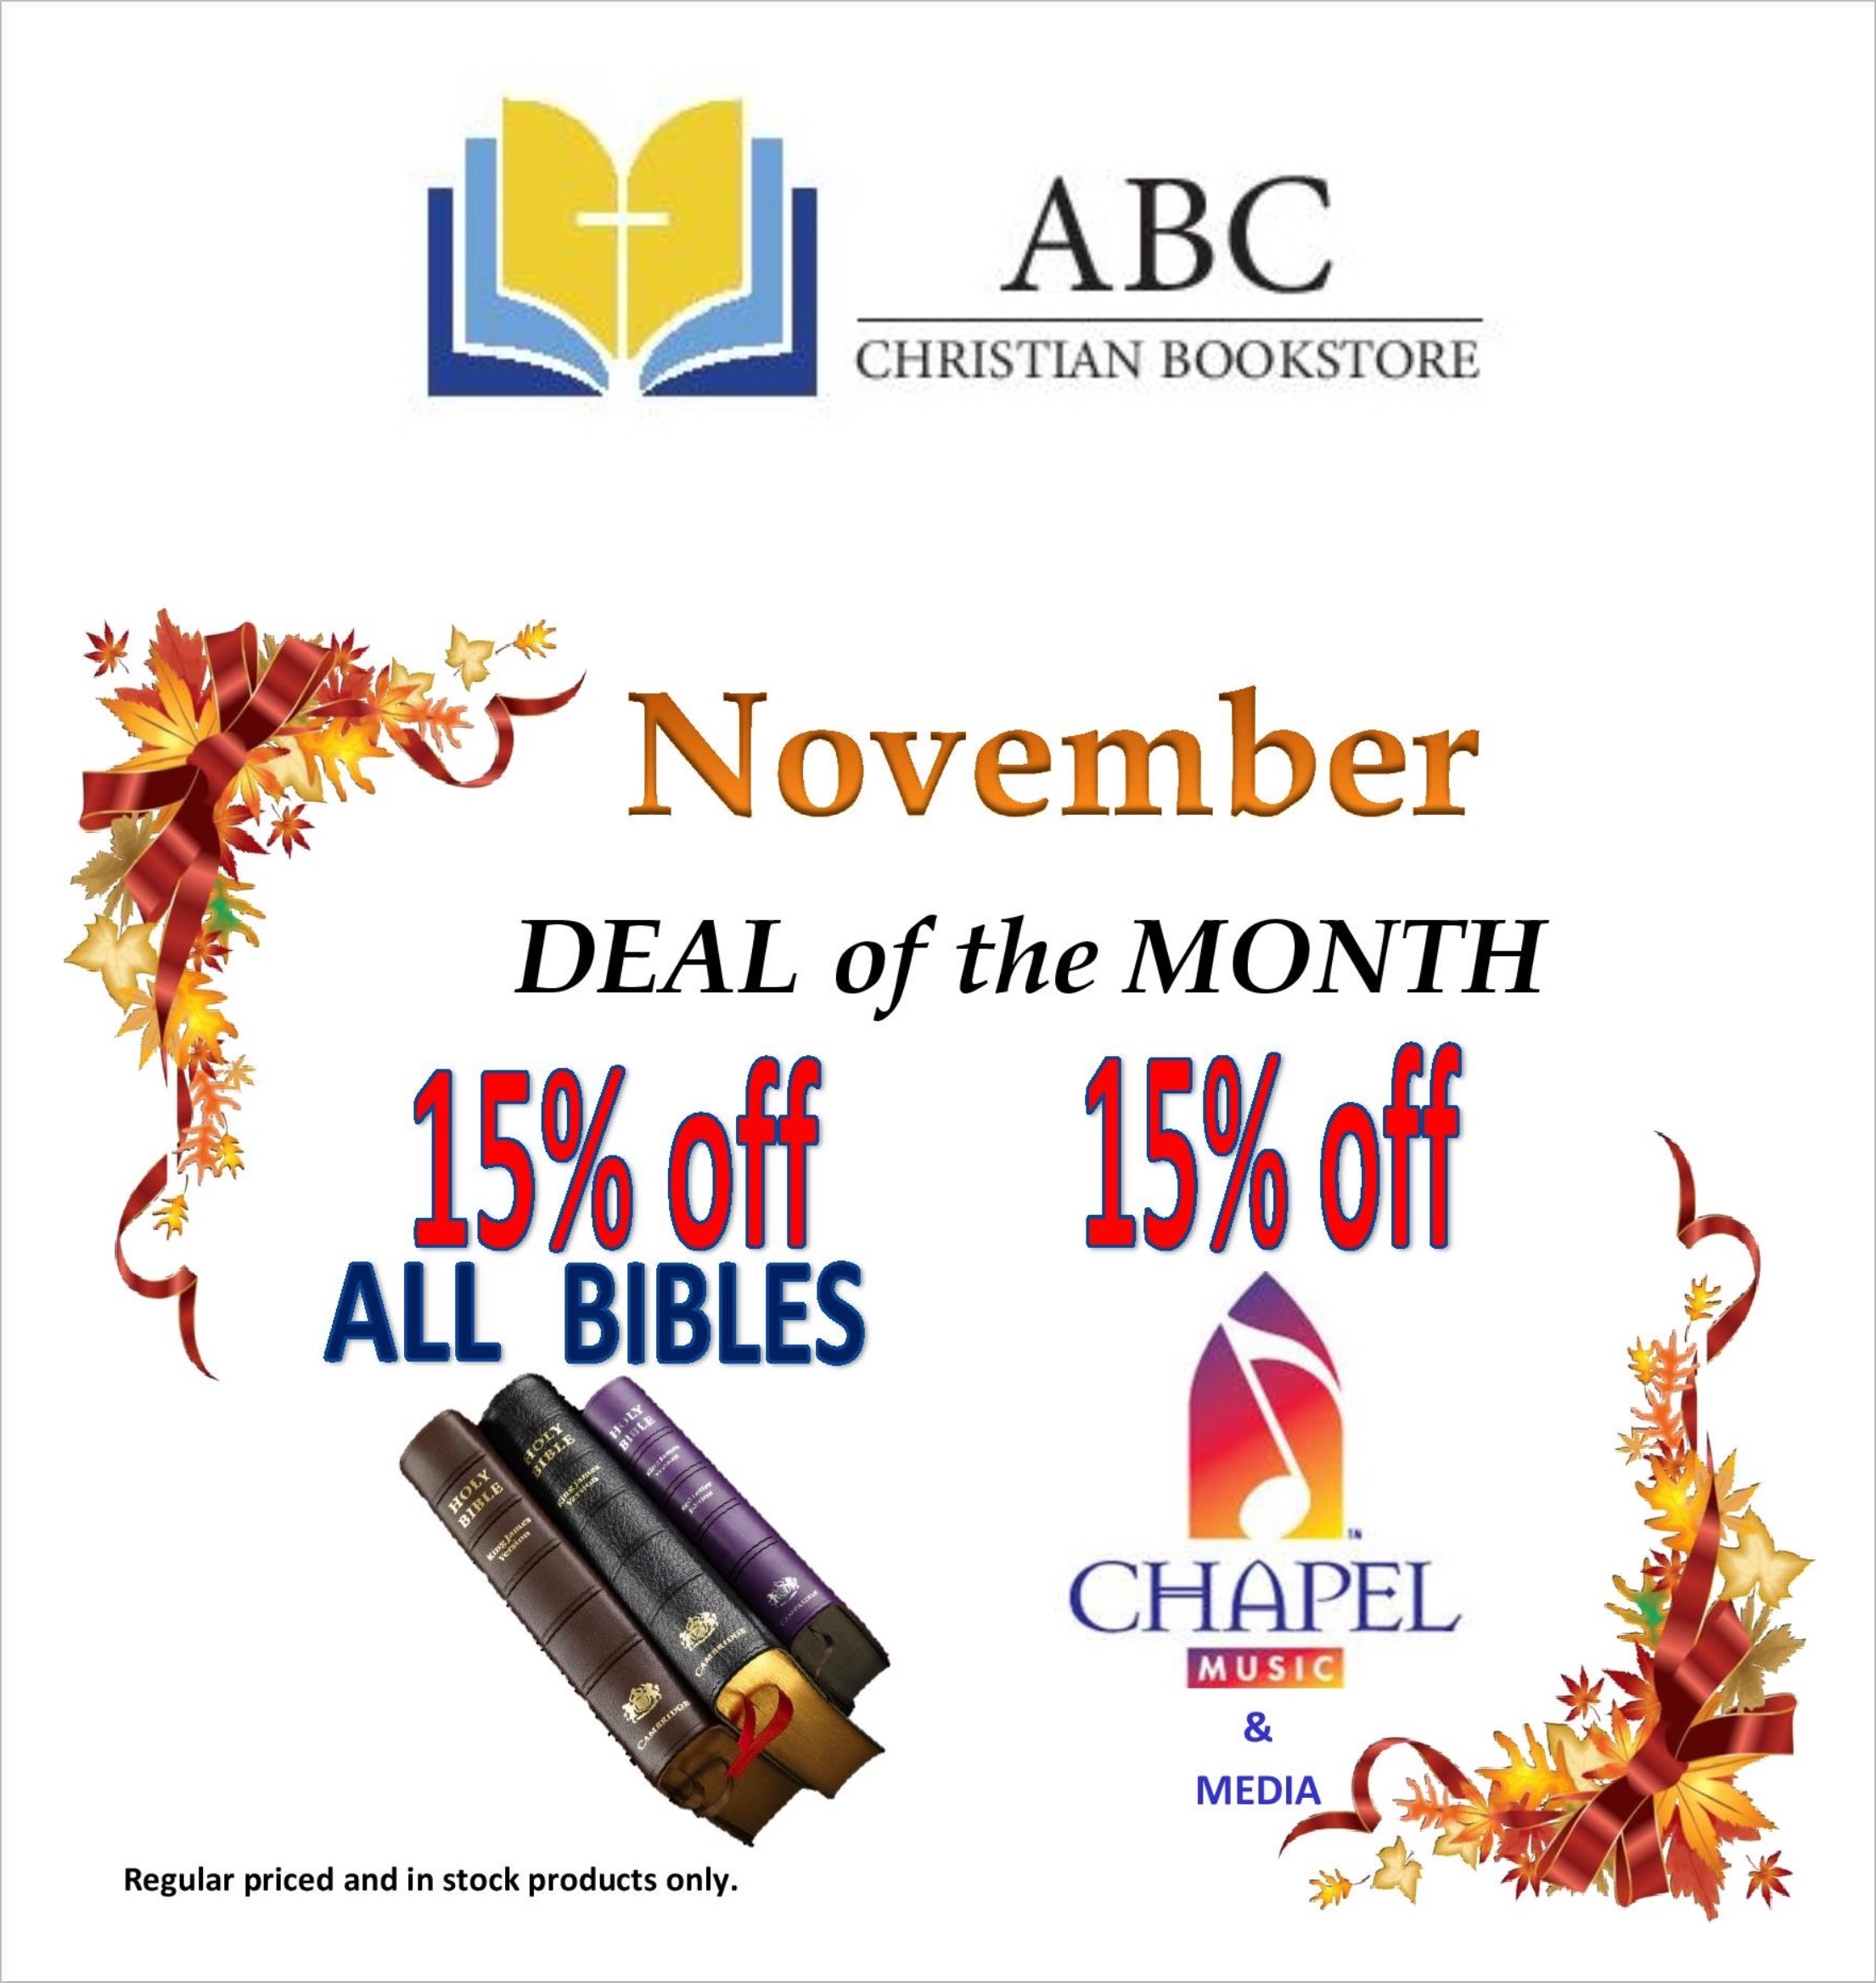 November book sale from ABC Christian Bookstore